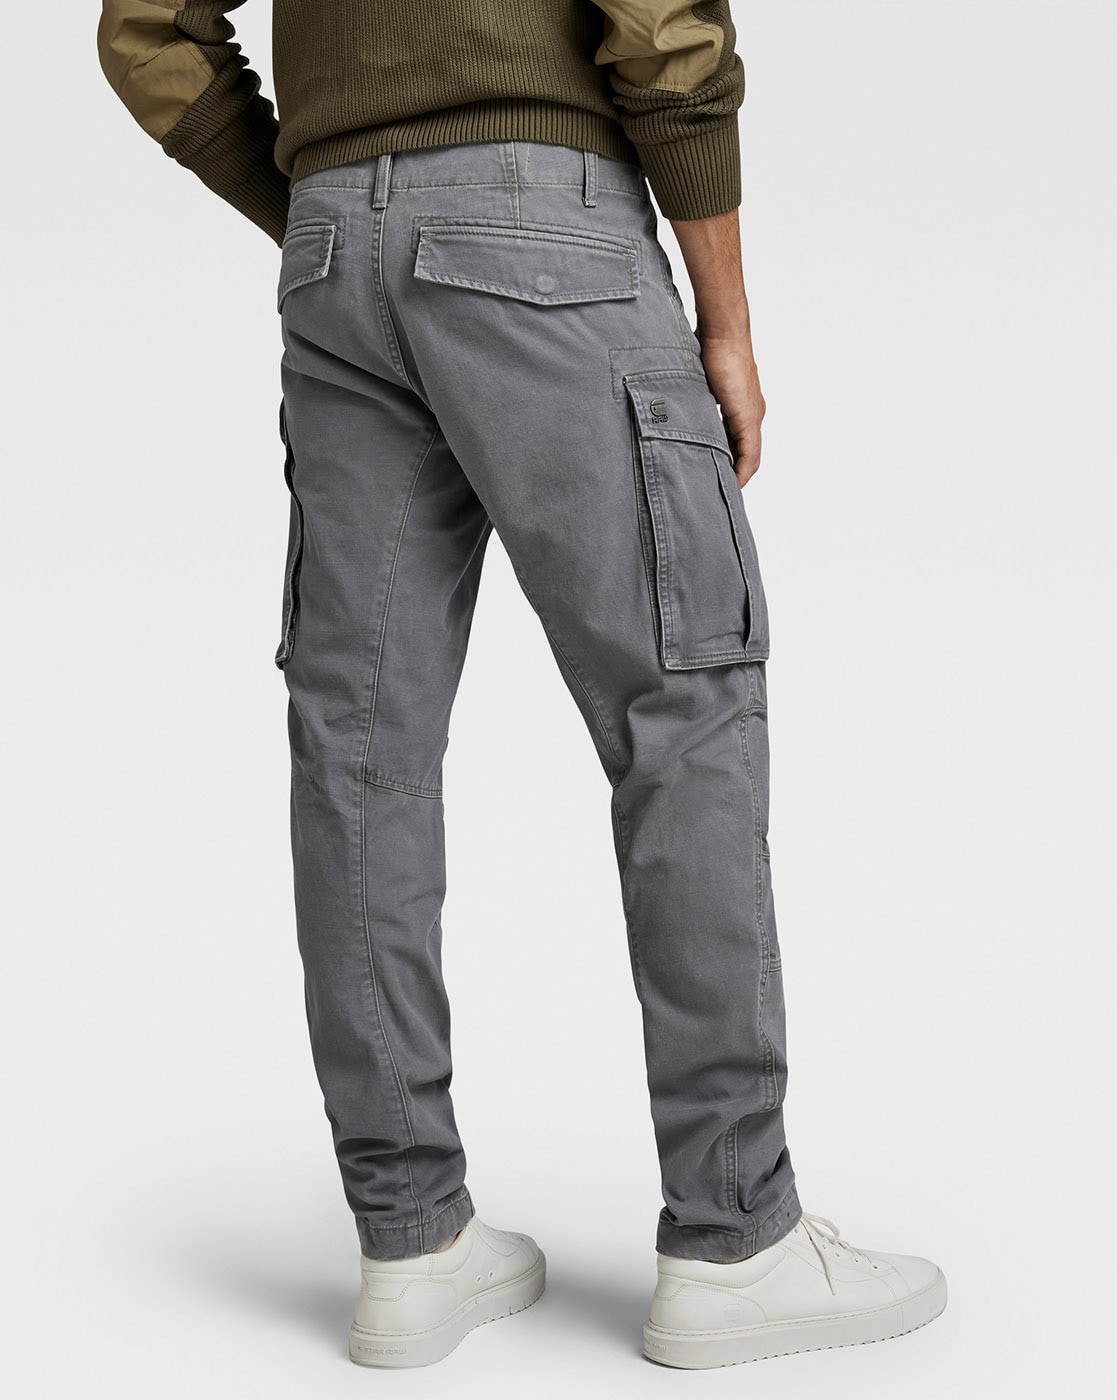 Mens GAS Jeans Trousers  Chinos  Gas Jeans Bob Gym Up Green Cargo Pants  Green  MARUSA balloon